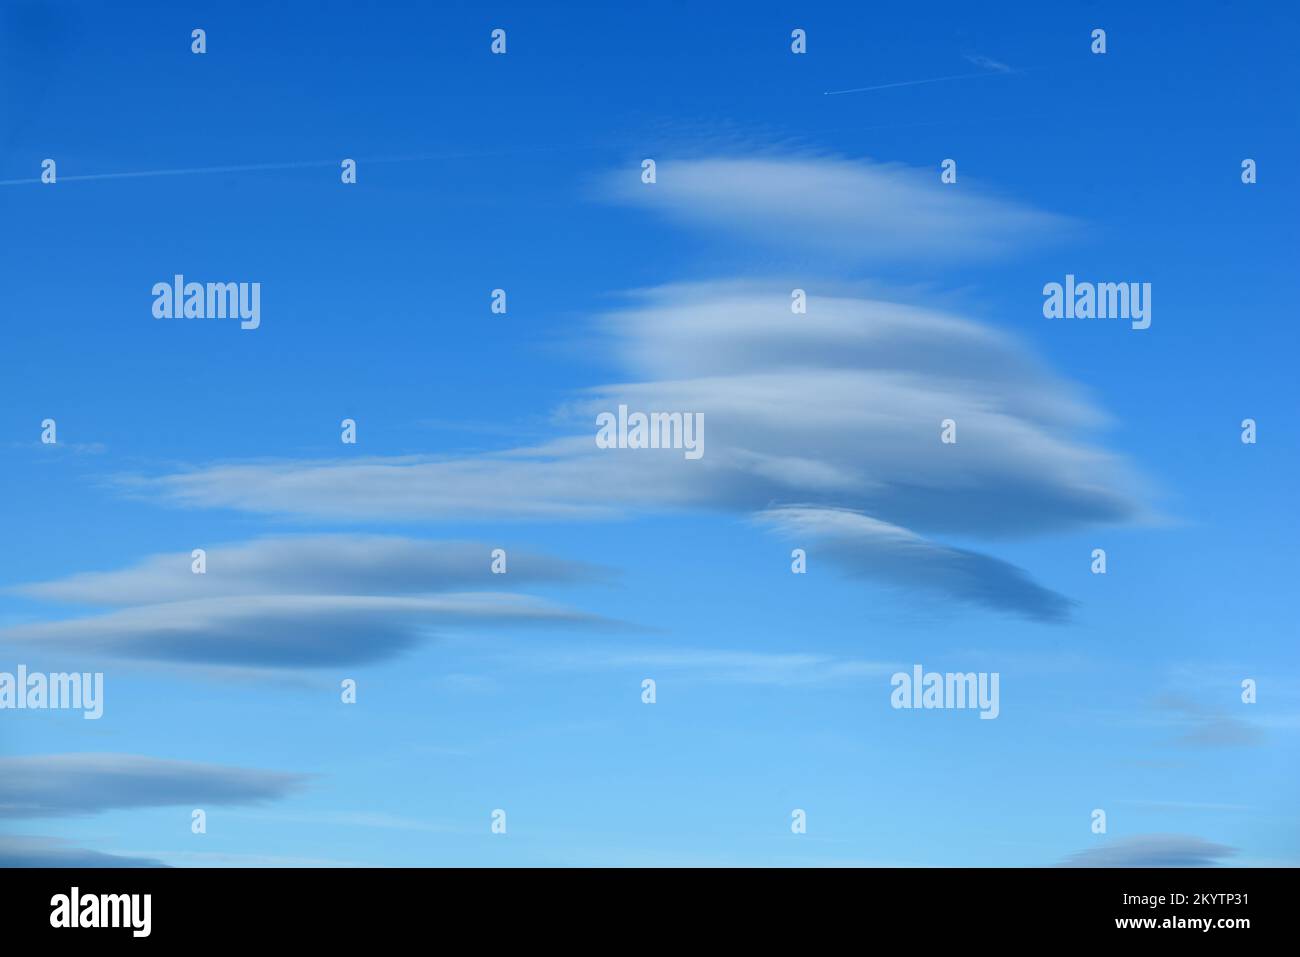 Lenticular Cloud Formation or Stratocumulus lenticular Clouds Stock Photo